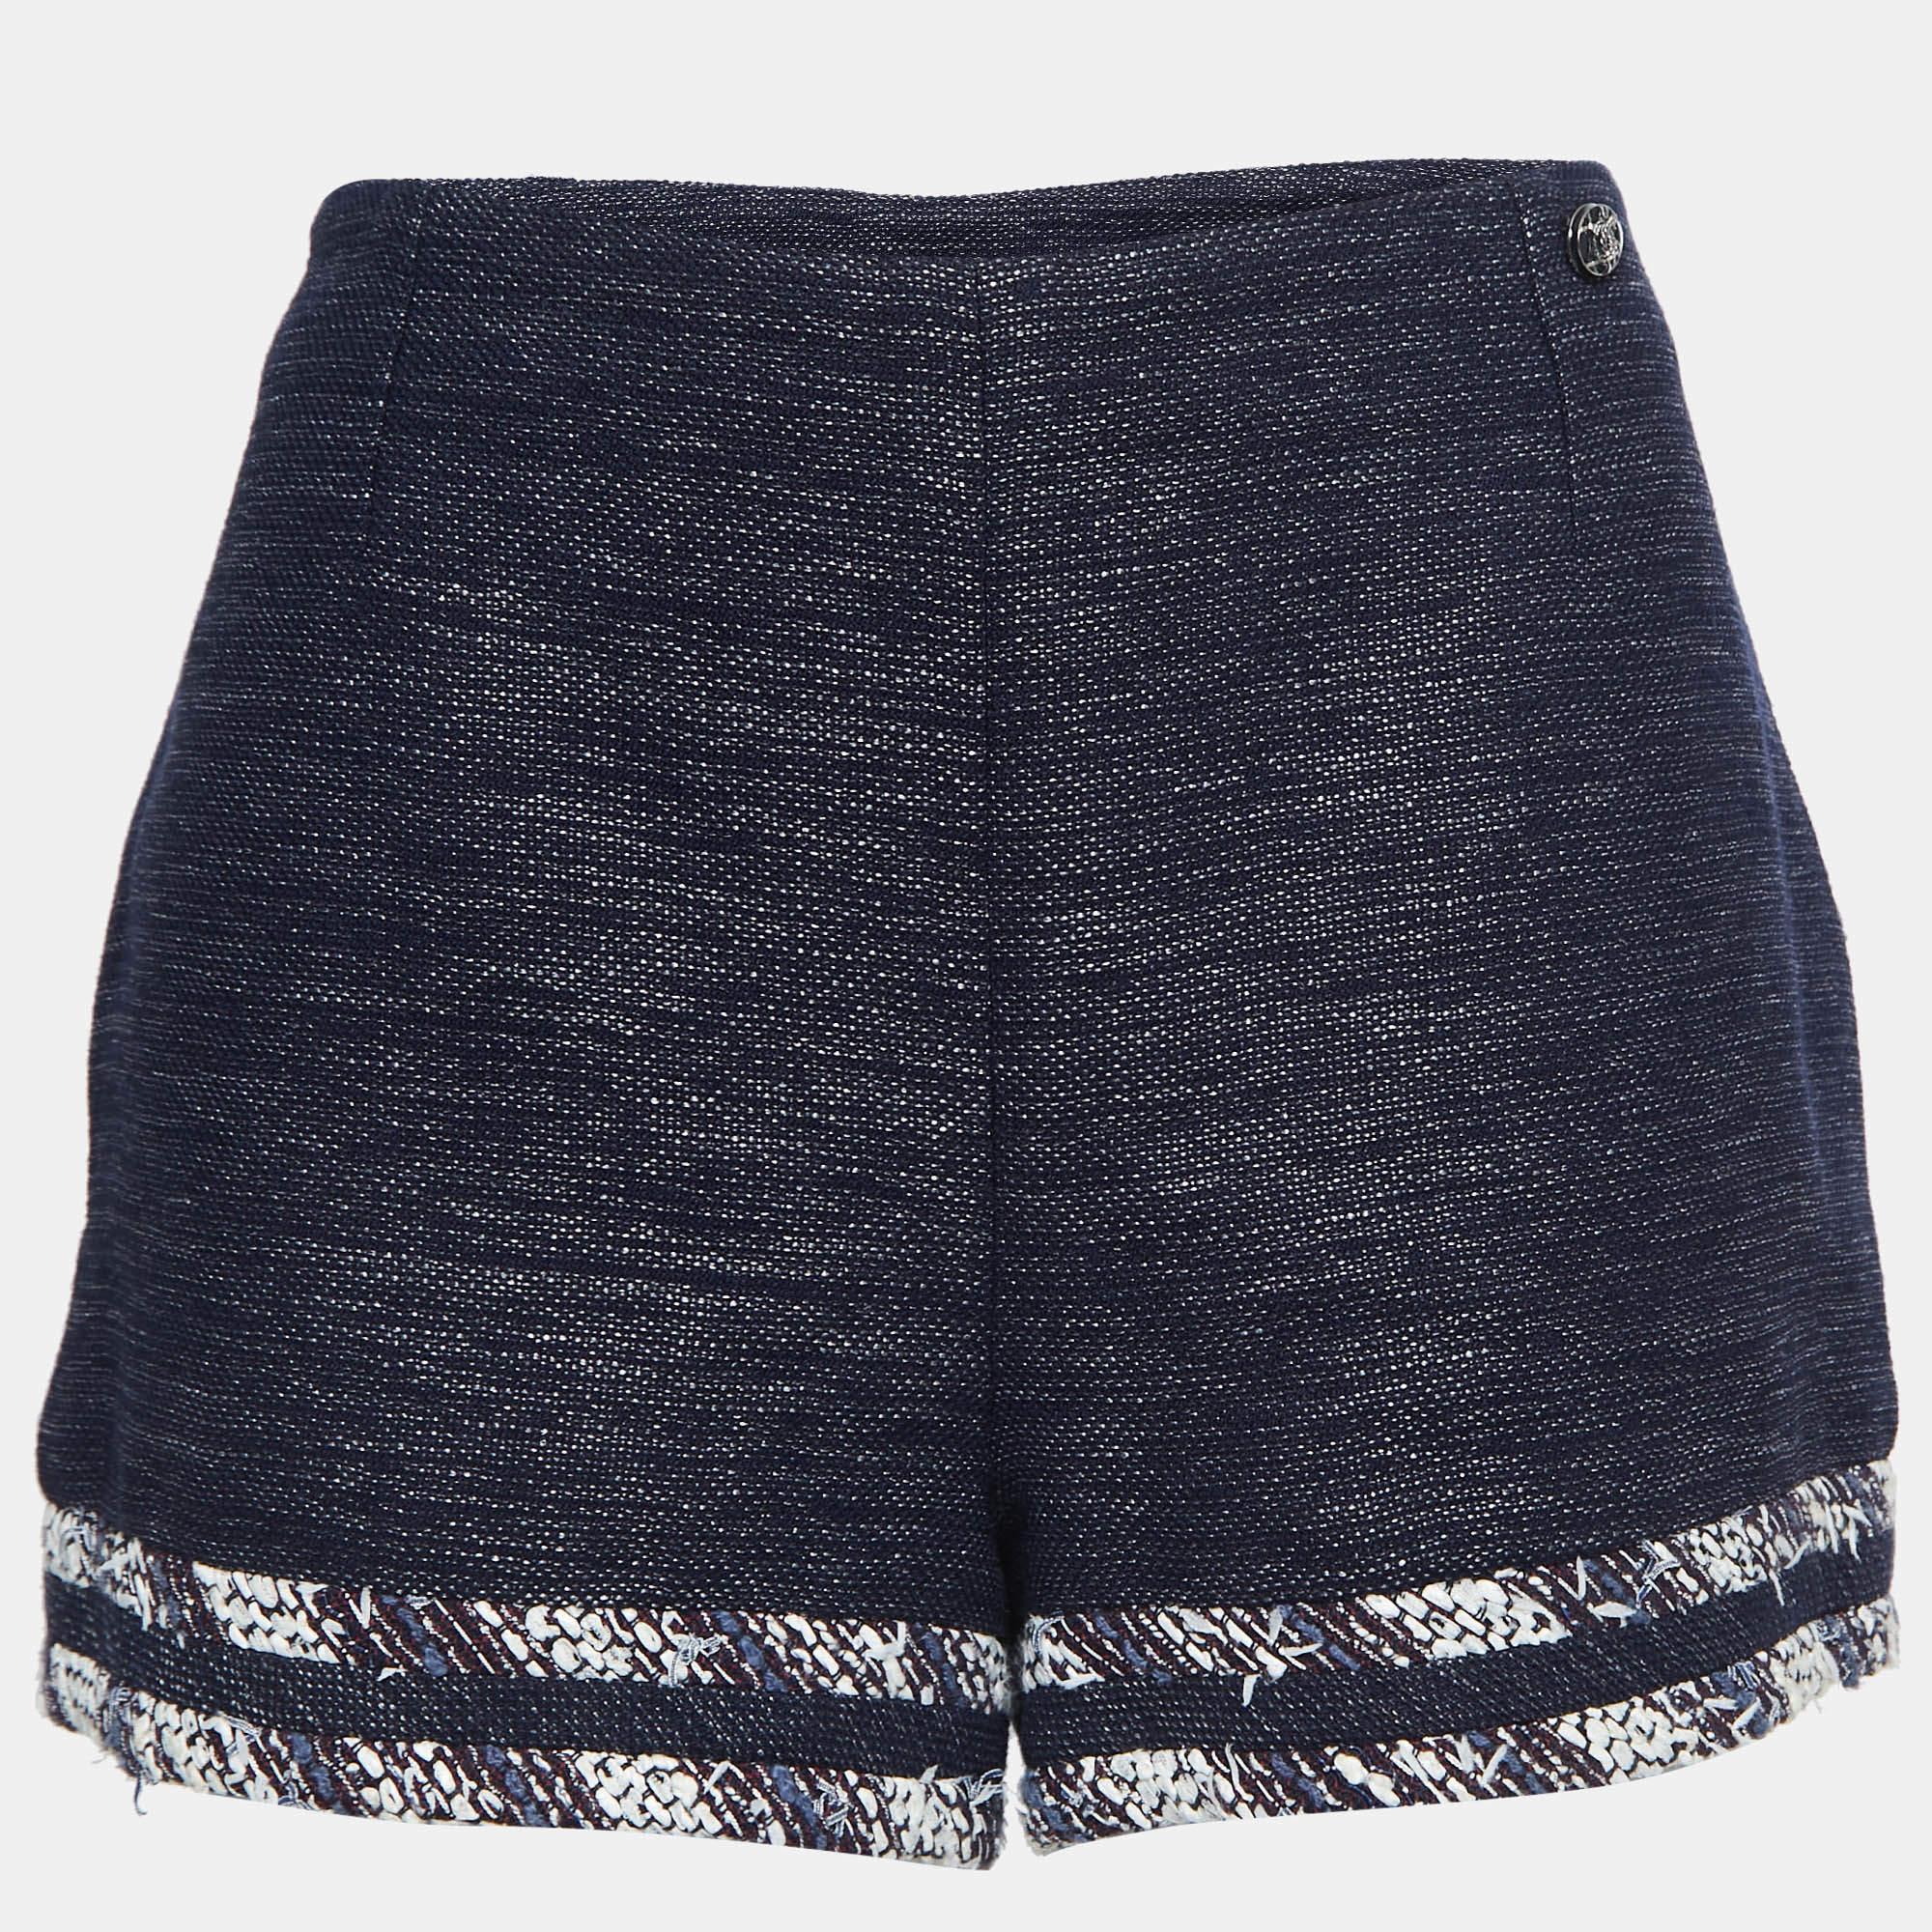 These delightful shorts by Chanel are a must-have addition to your wardrobe. They have a tweed finish and a zip closure. Team them with a statement top and pumps for an evening out.

